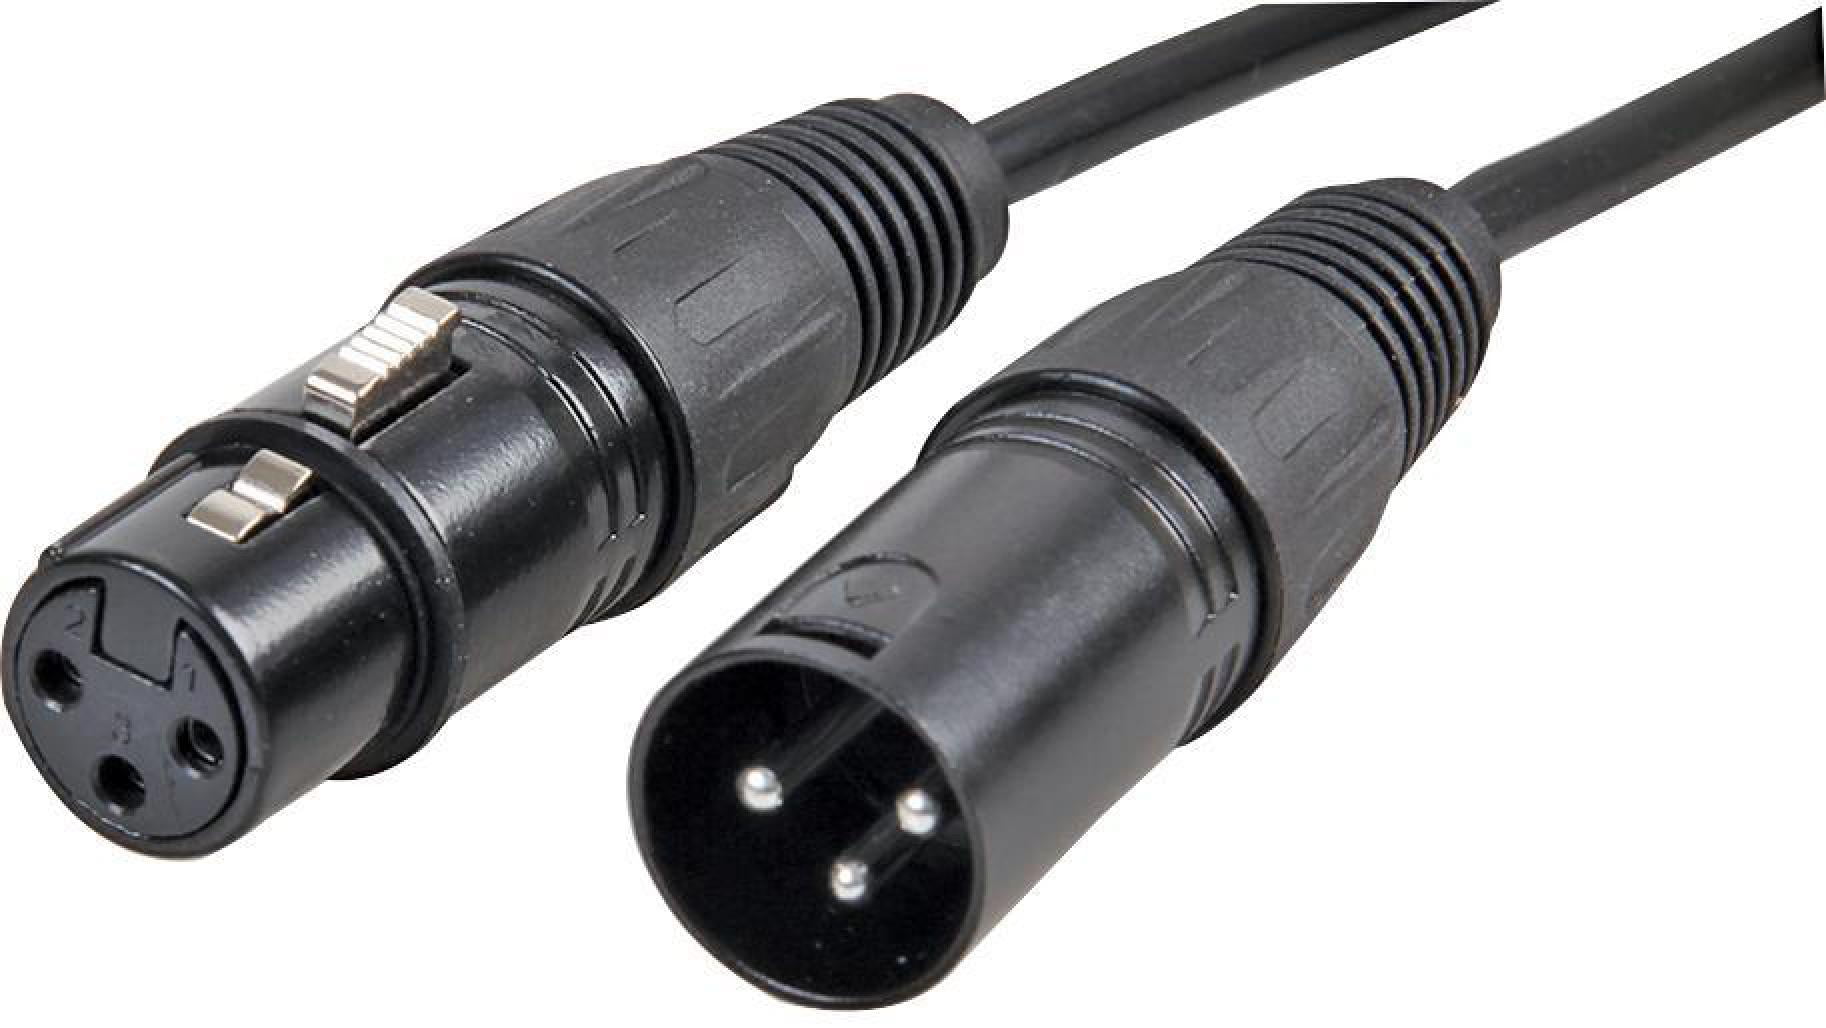 Black Zinc Alloy Head XLR Microphone Cable 1M Cannon Double Shielded 6.35Mm  Male To 3